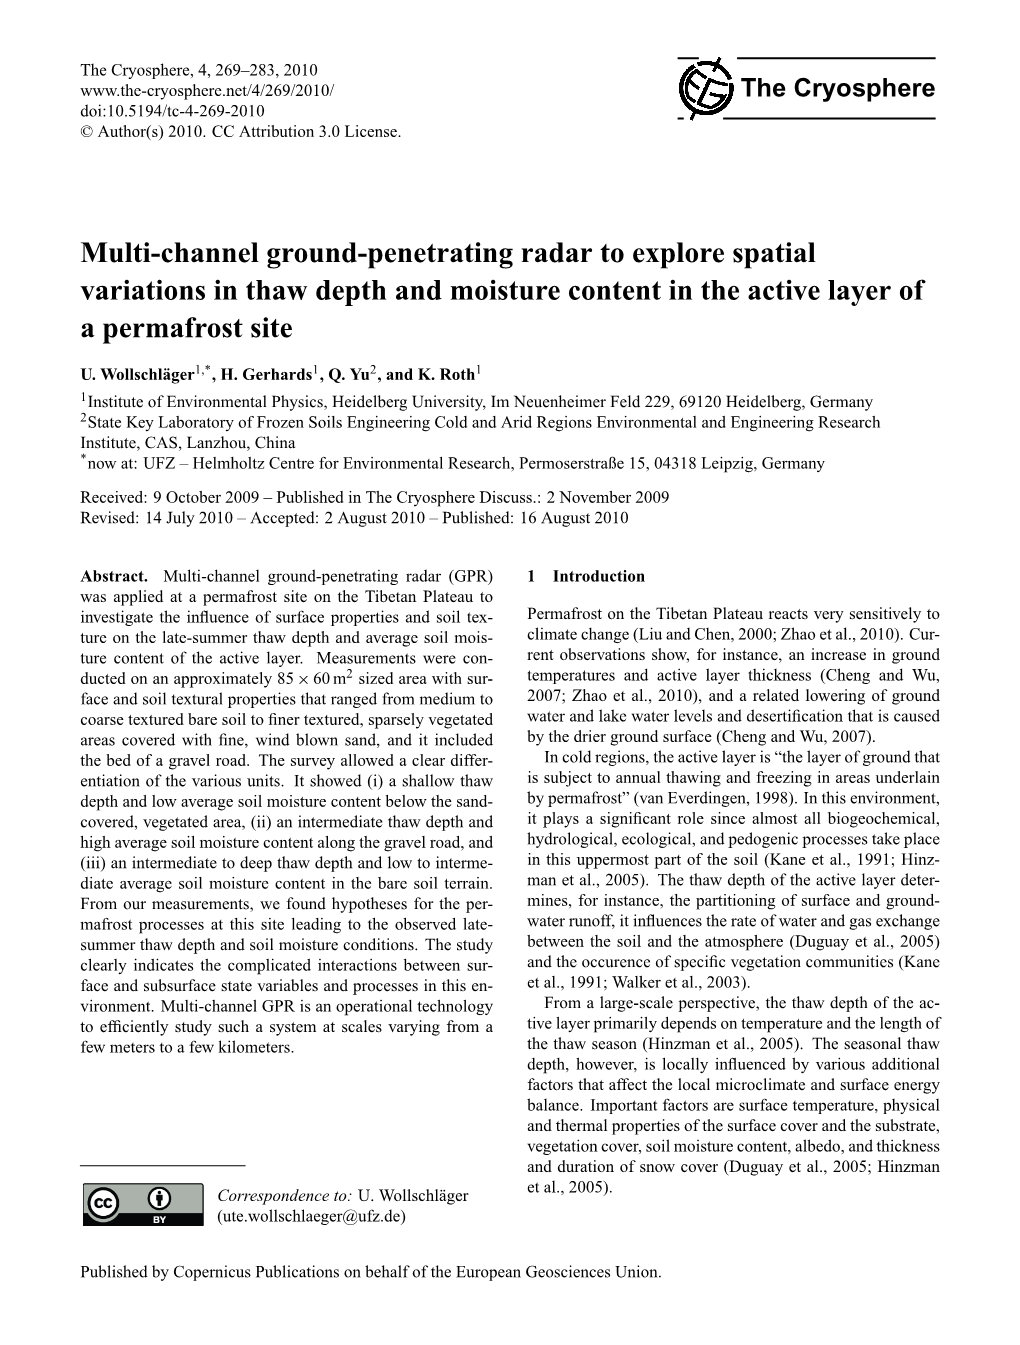 Multi-Channel Ground-Penetrating Radar to Explore Spatial Variations in Thaw Depth and Moisture Content in the Active Layer of a Permafrost Site